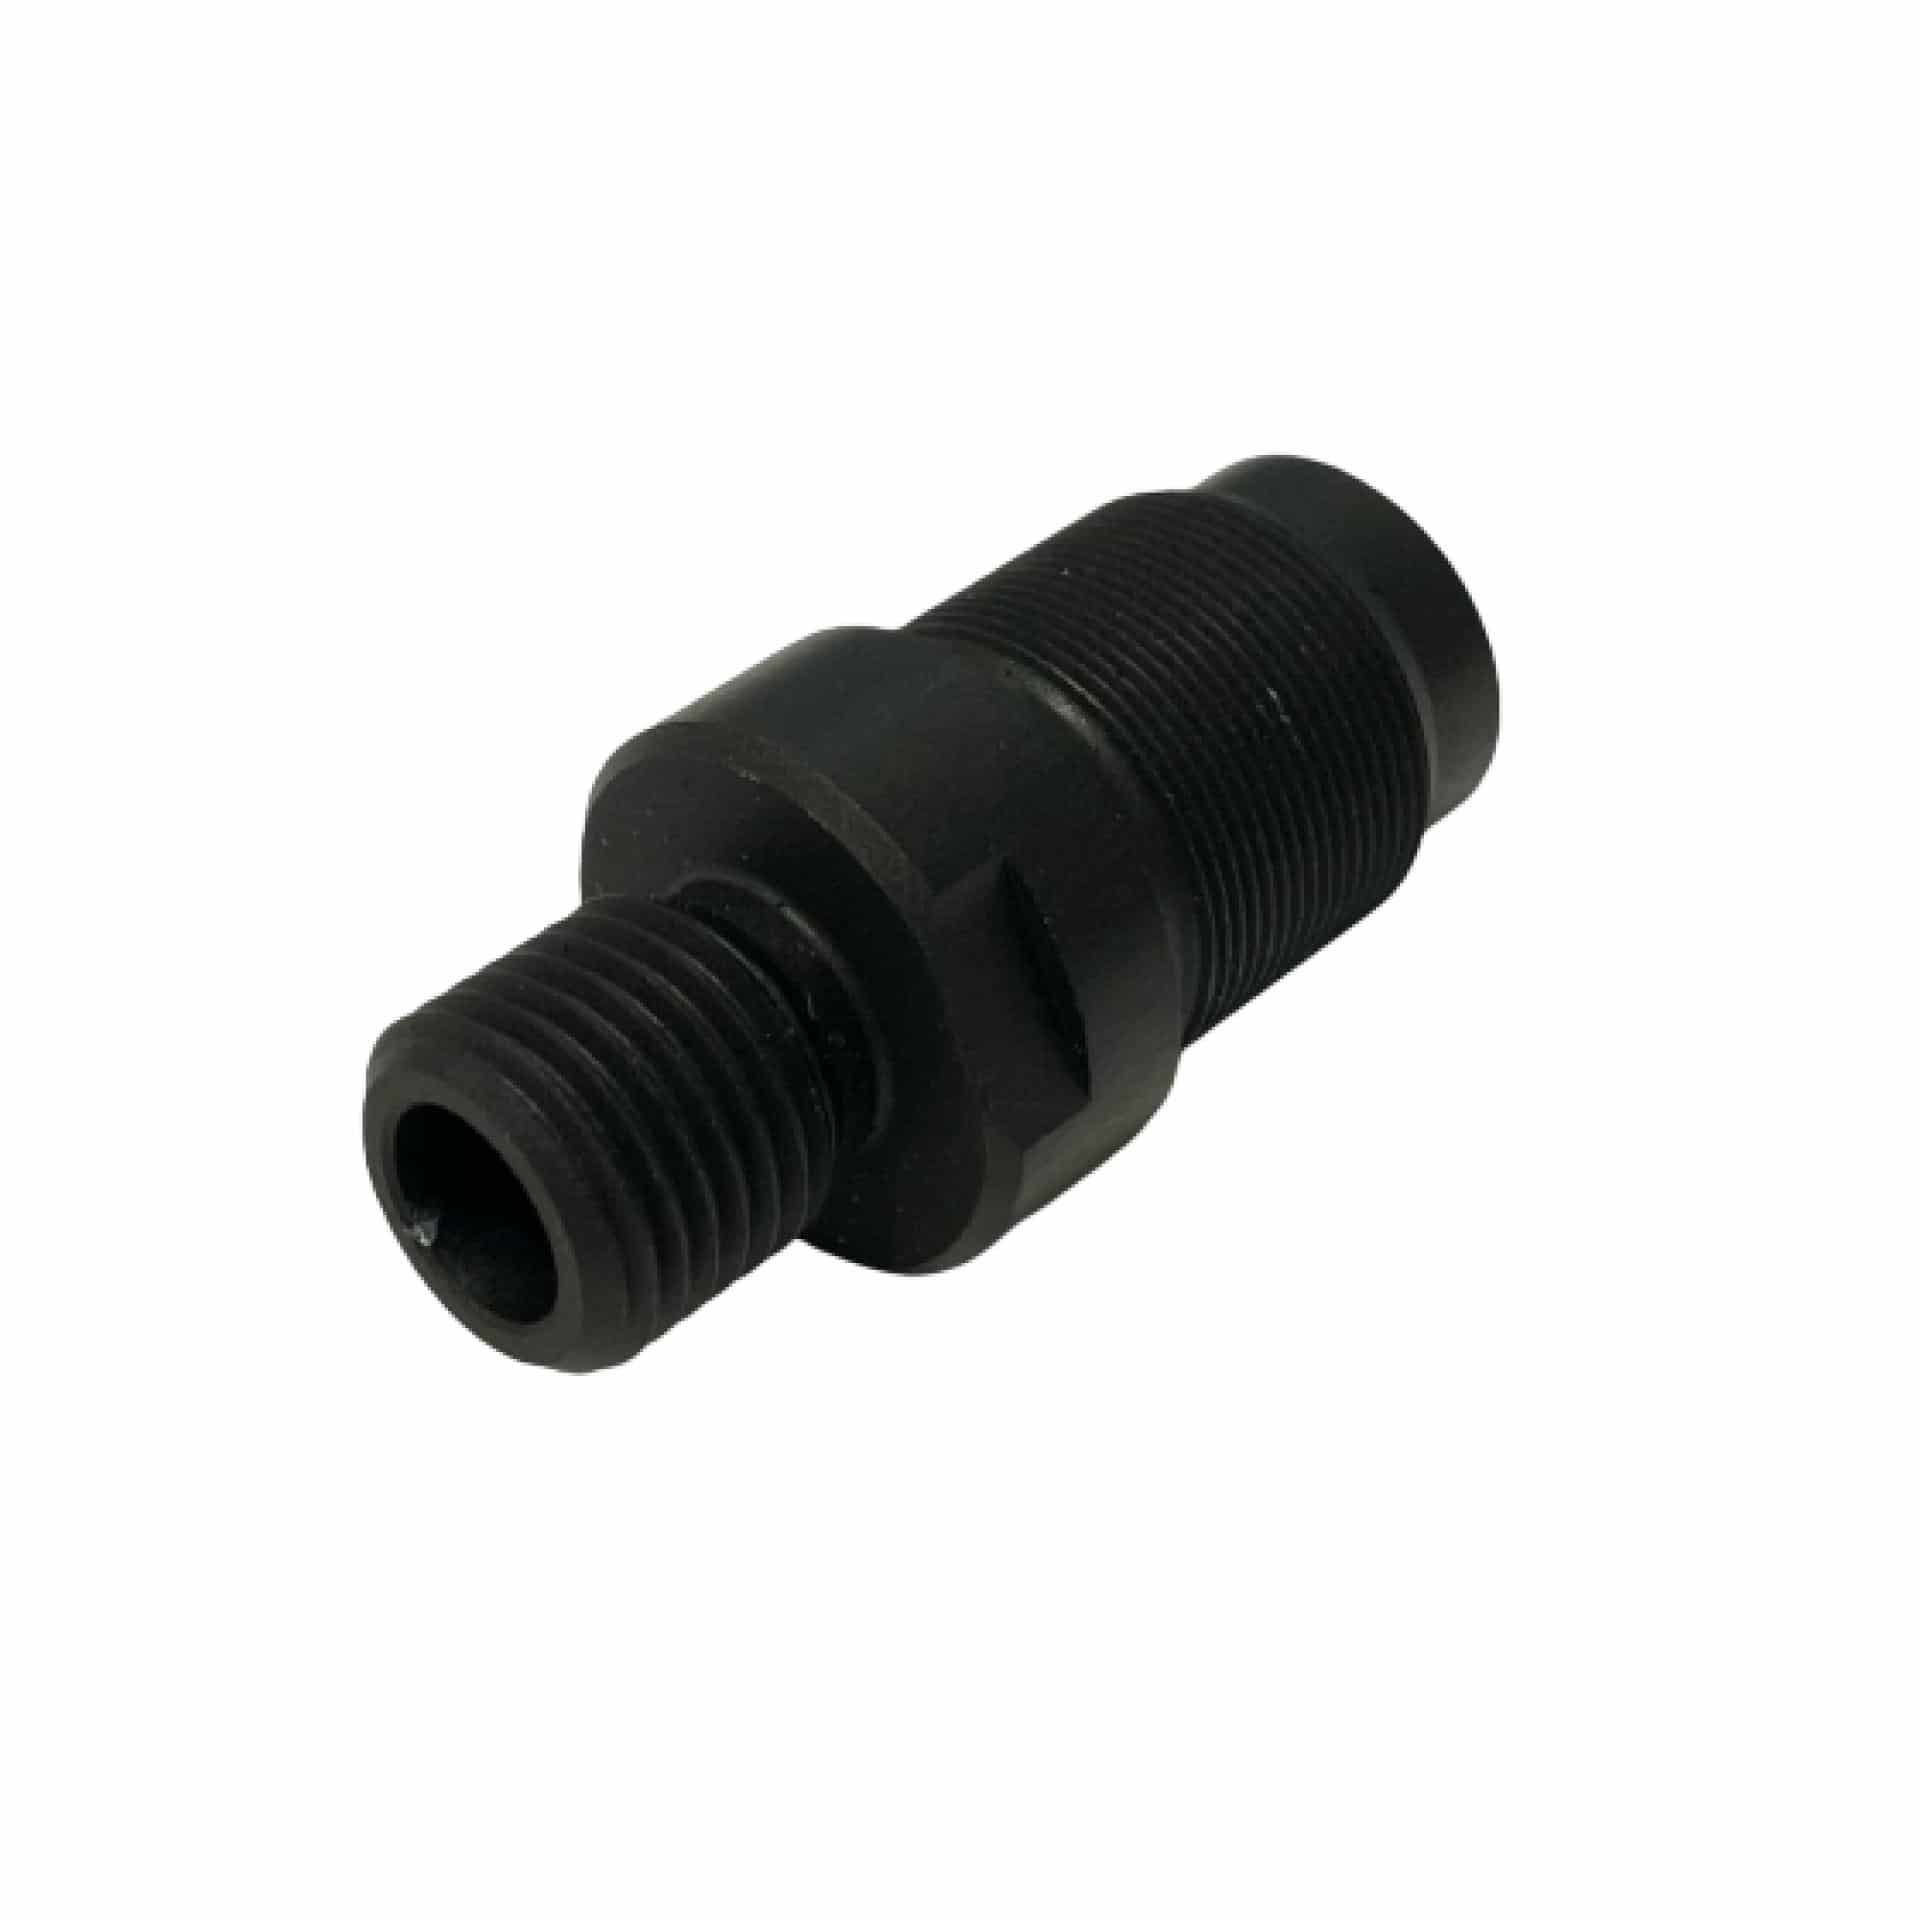 Silencer Adapter Air Arms TR S510